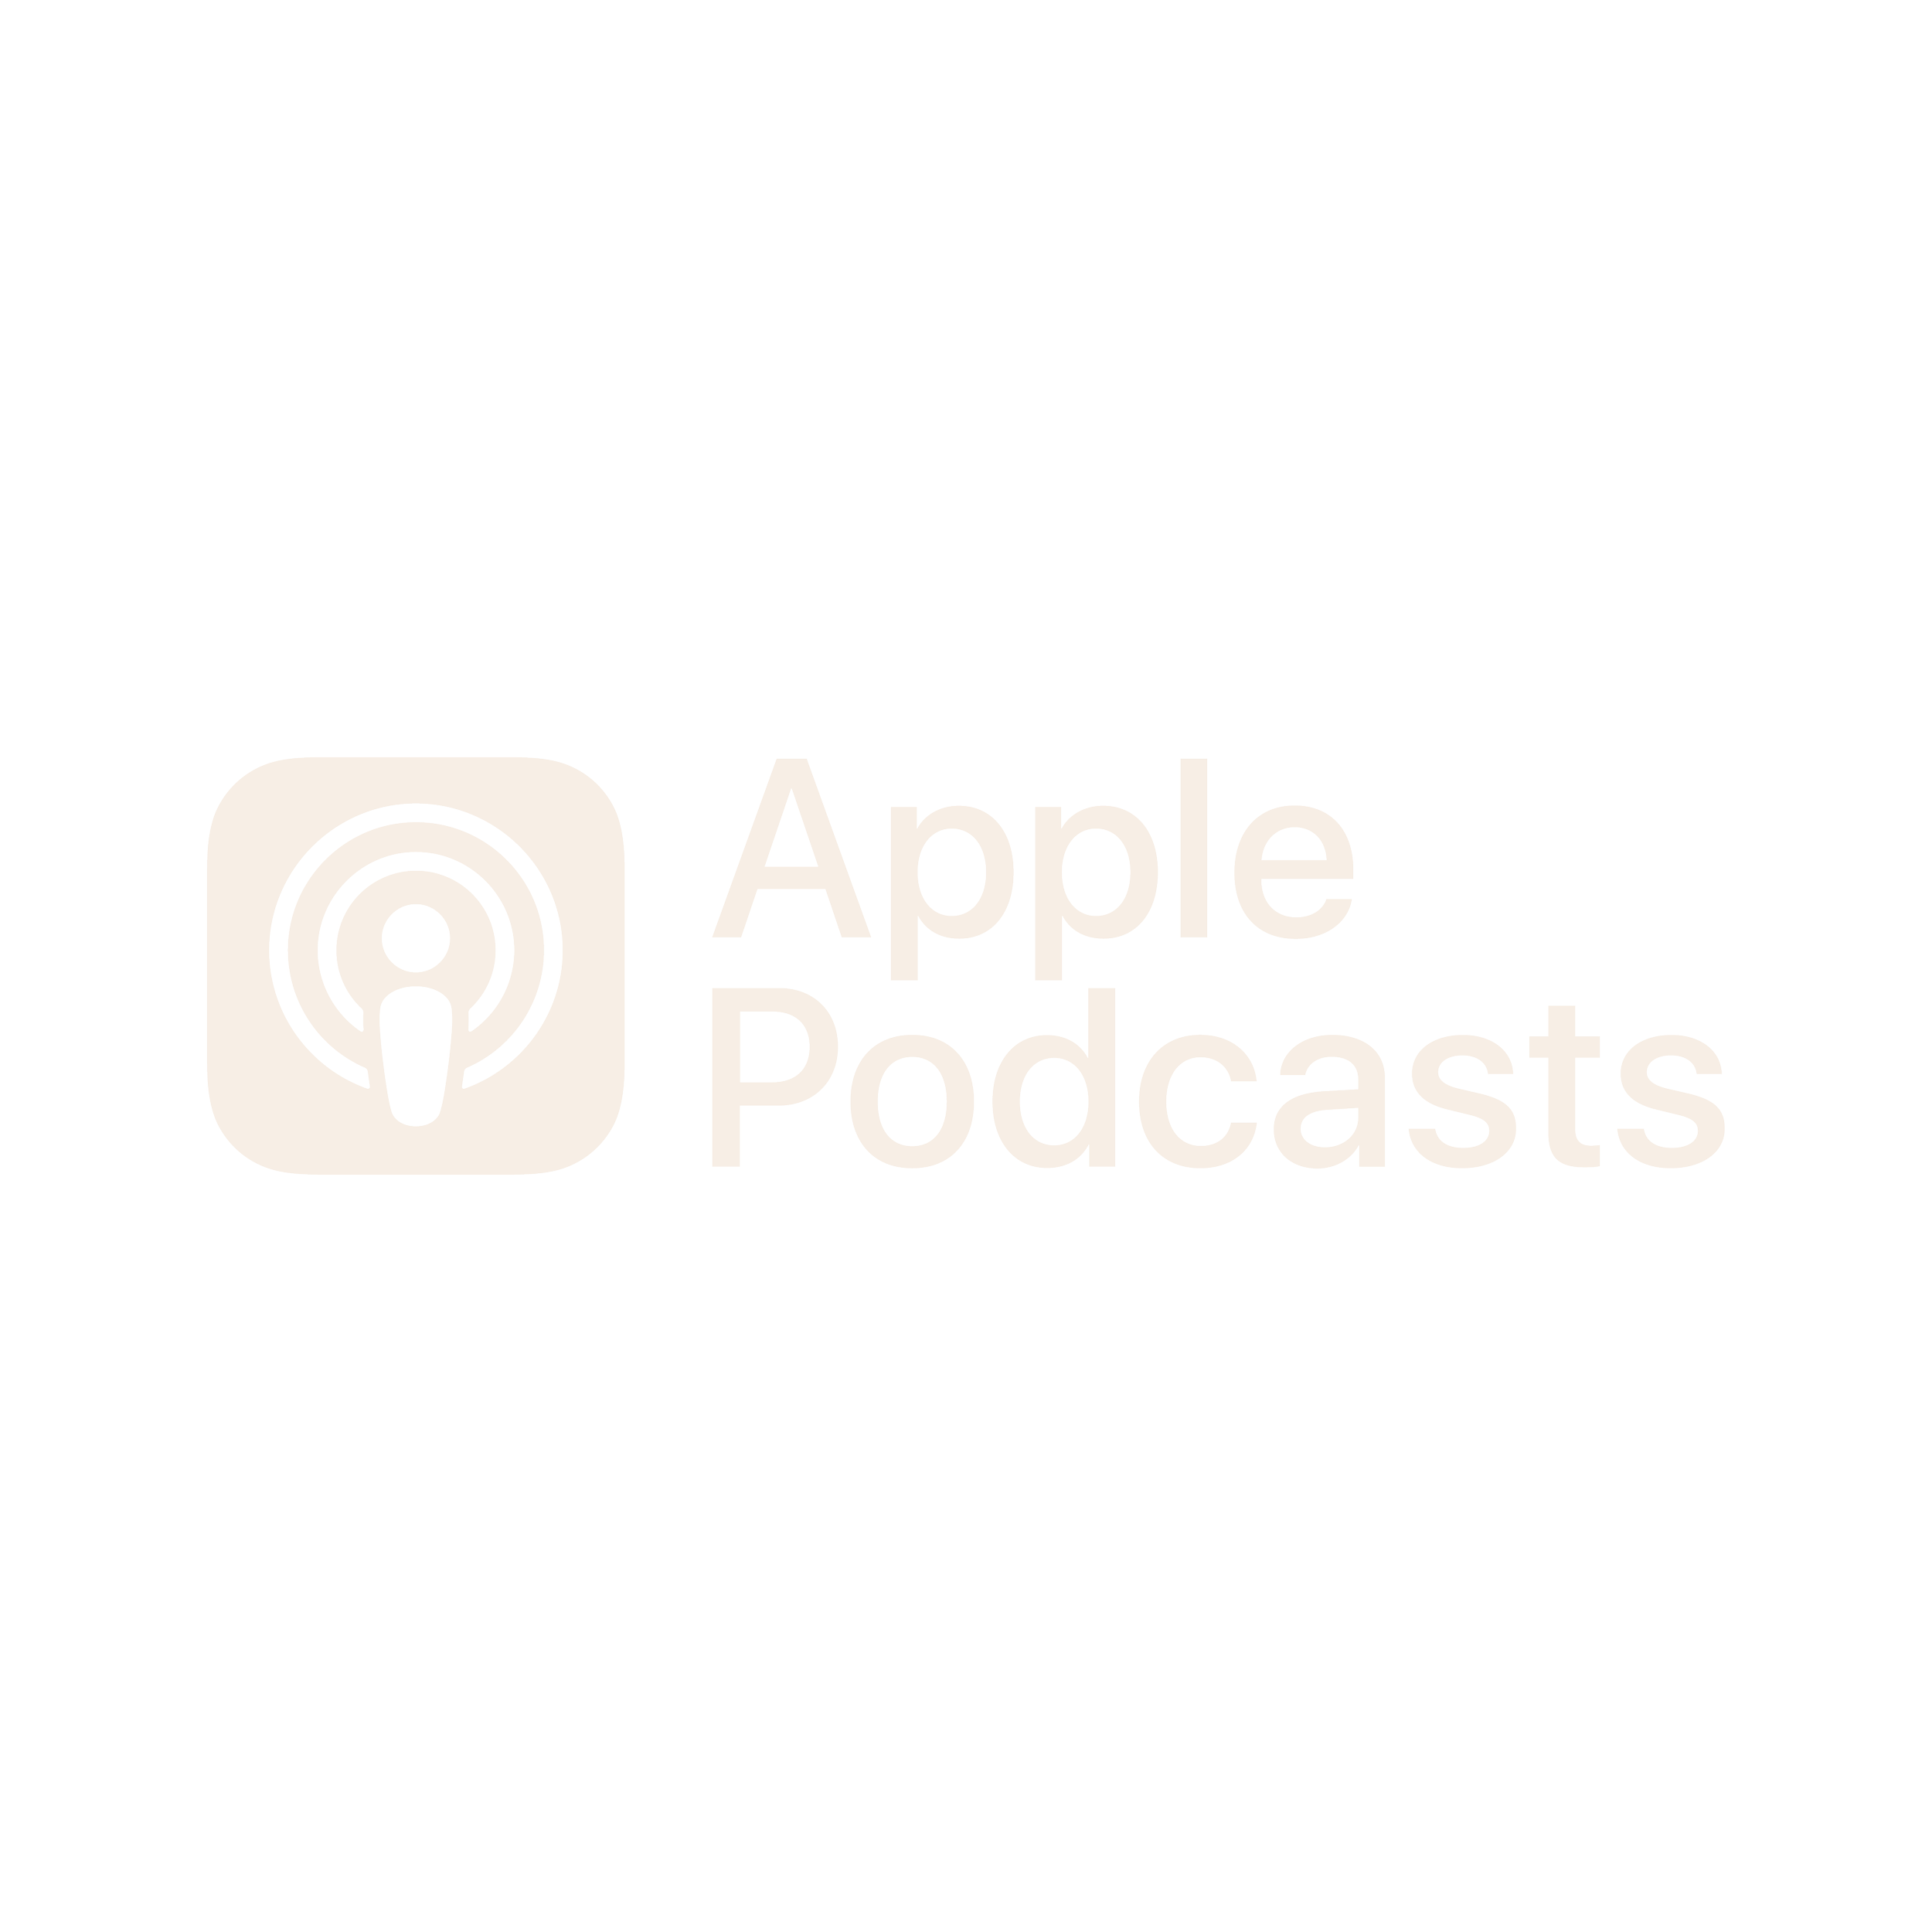 Podcast App Logos_Apple Podcasts Light.png